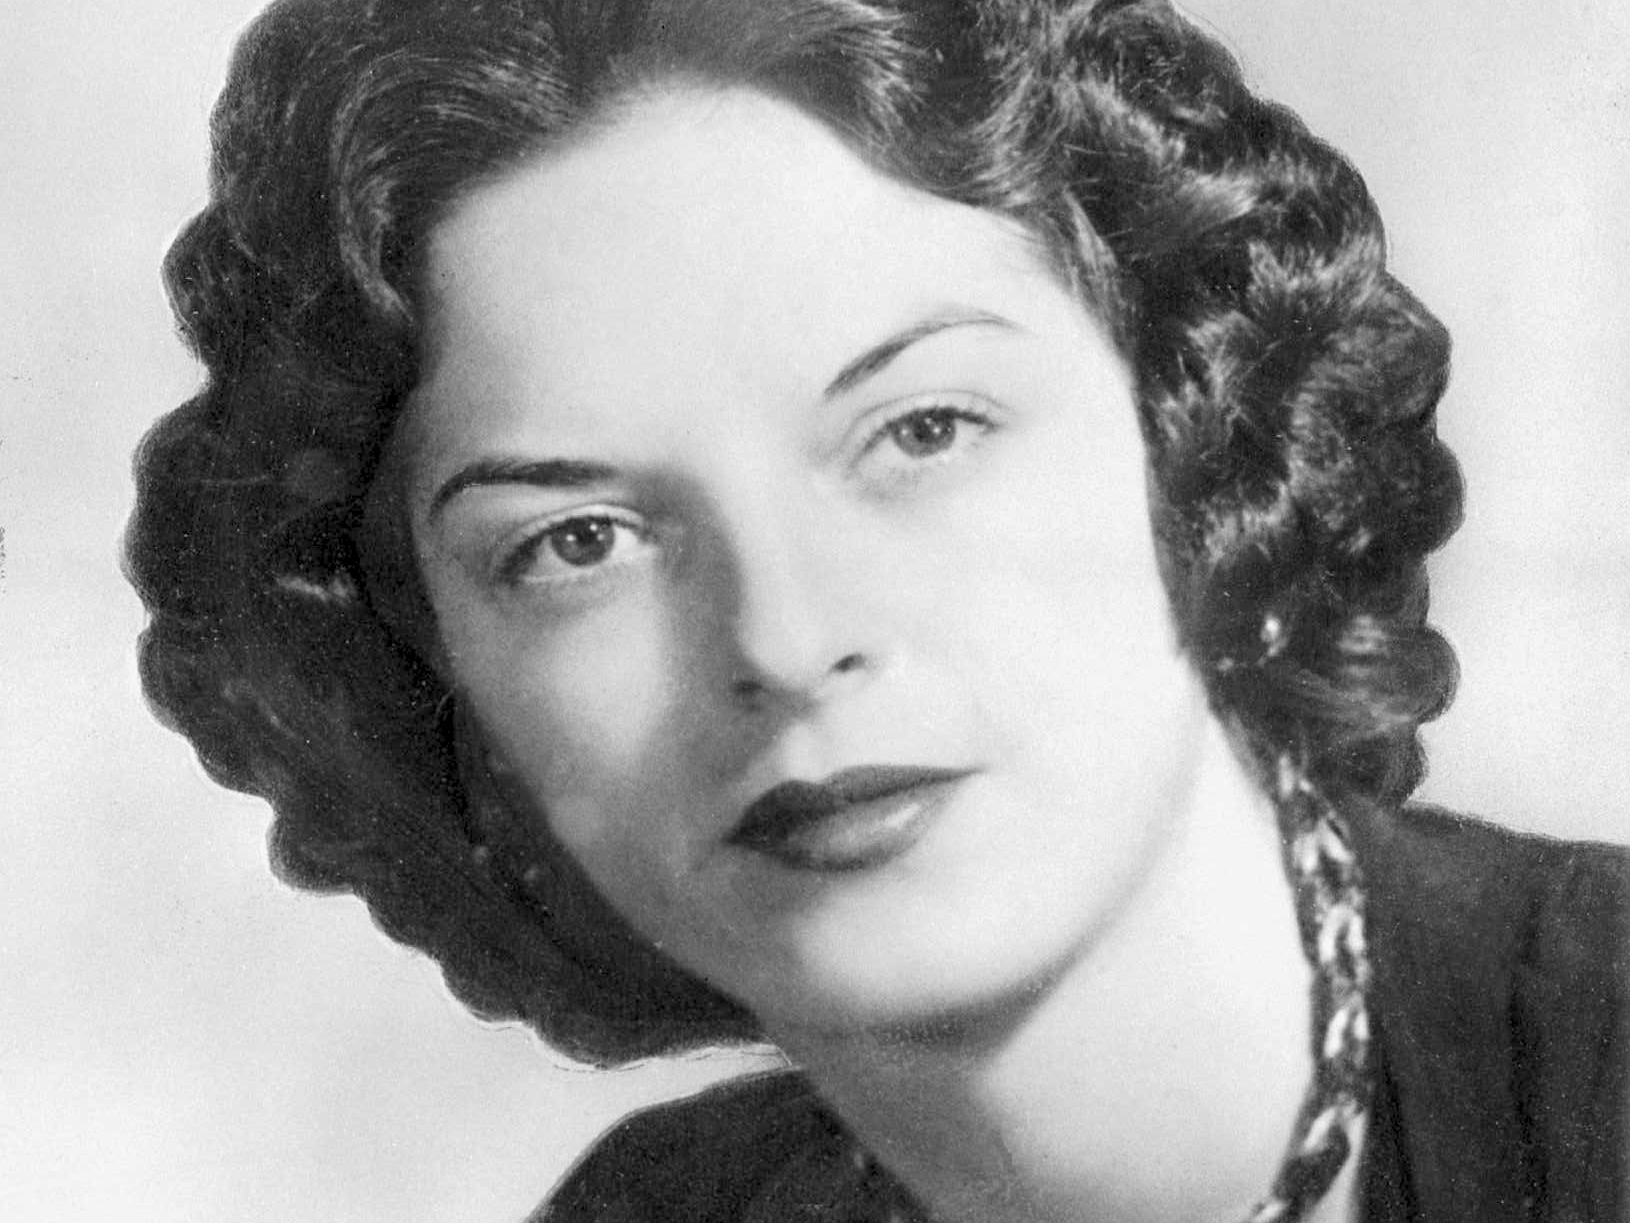 Carolyn Bryant, the woman who lied about Emmett Till. -IuPtheScORe